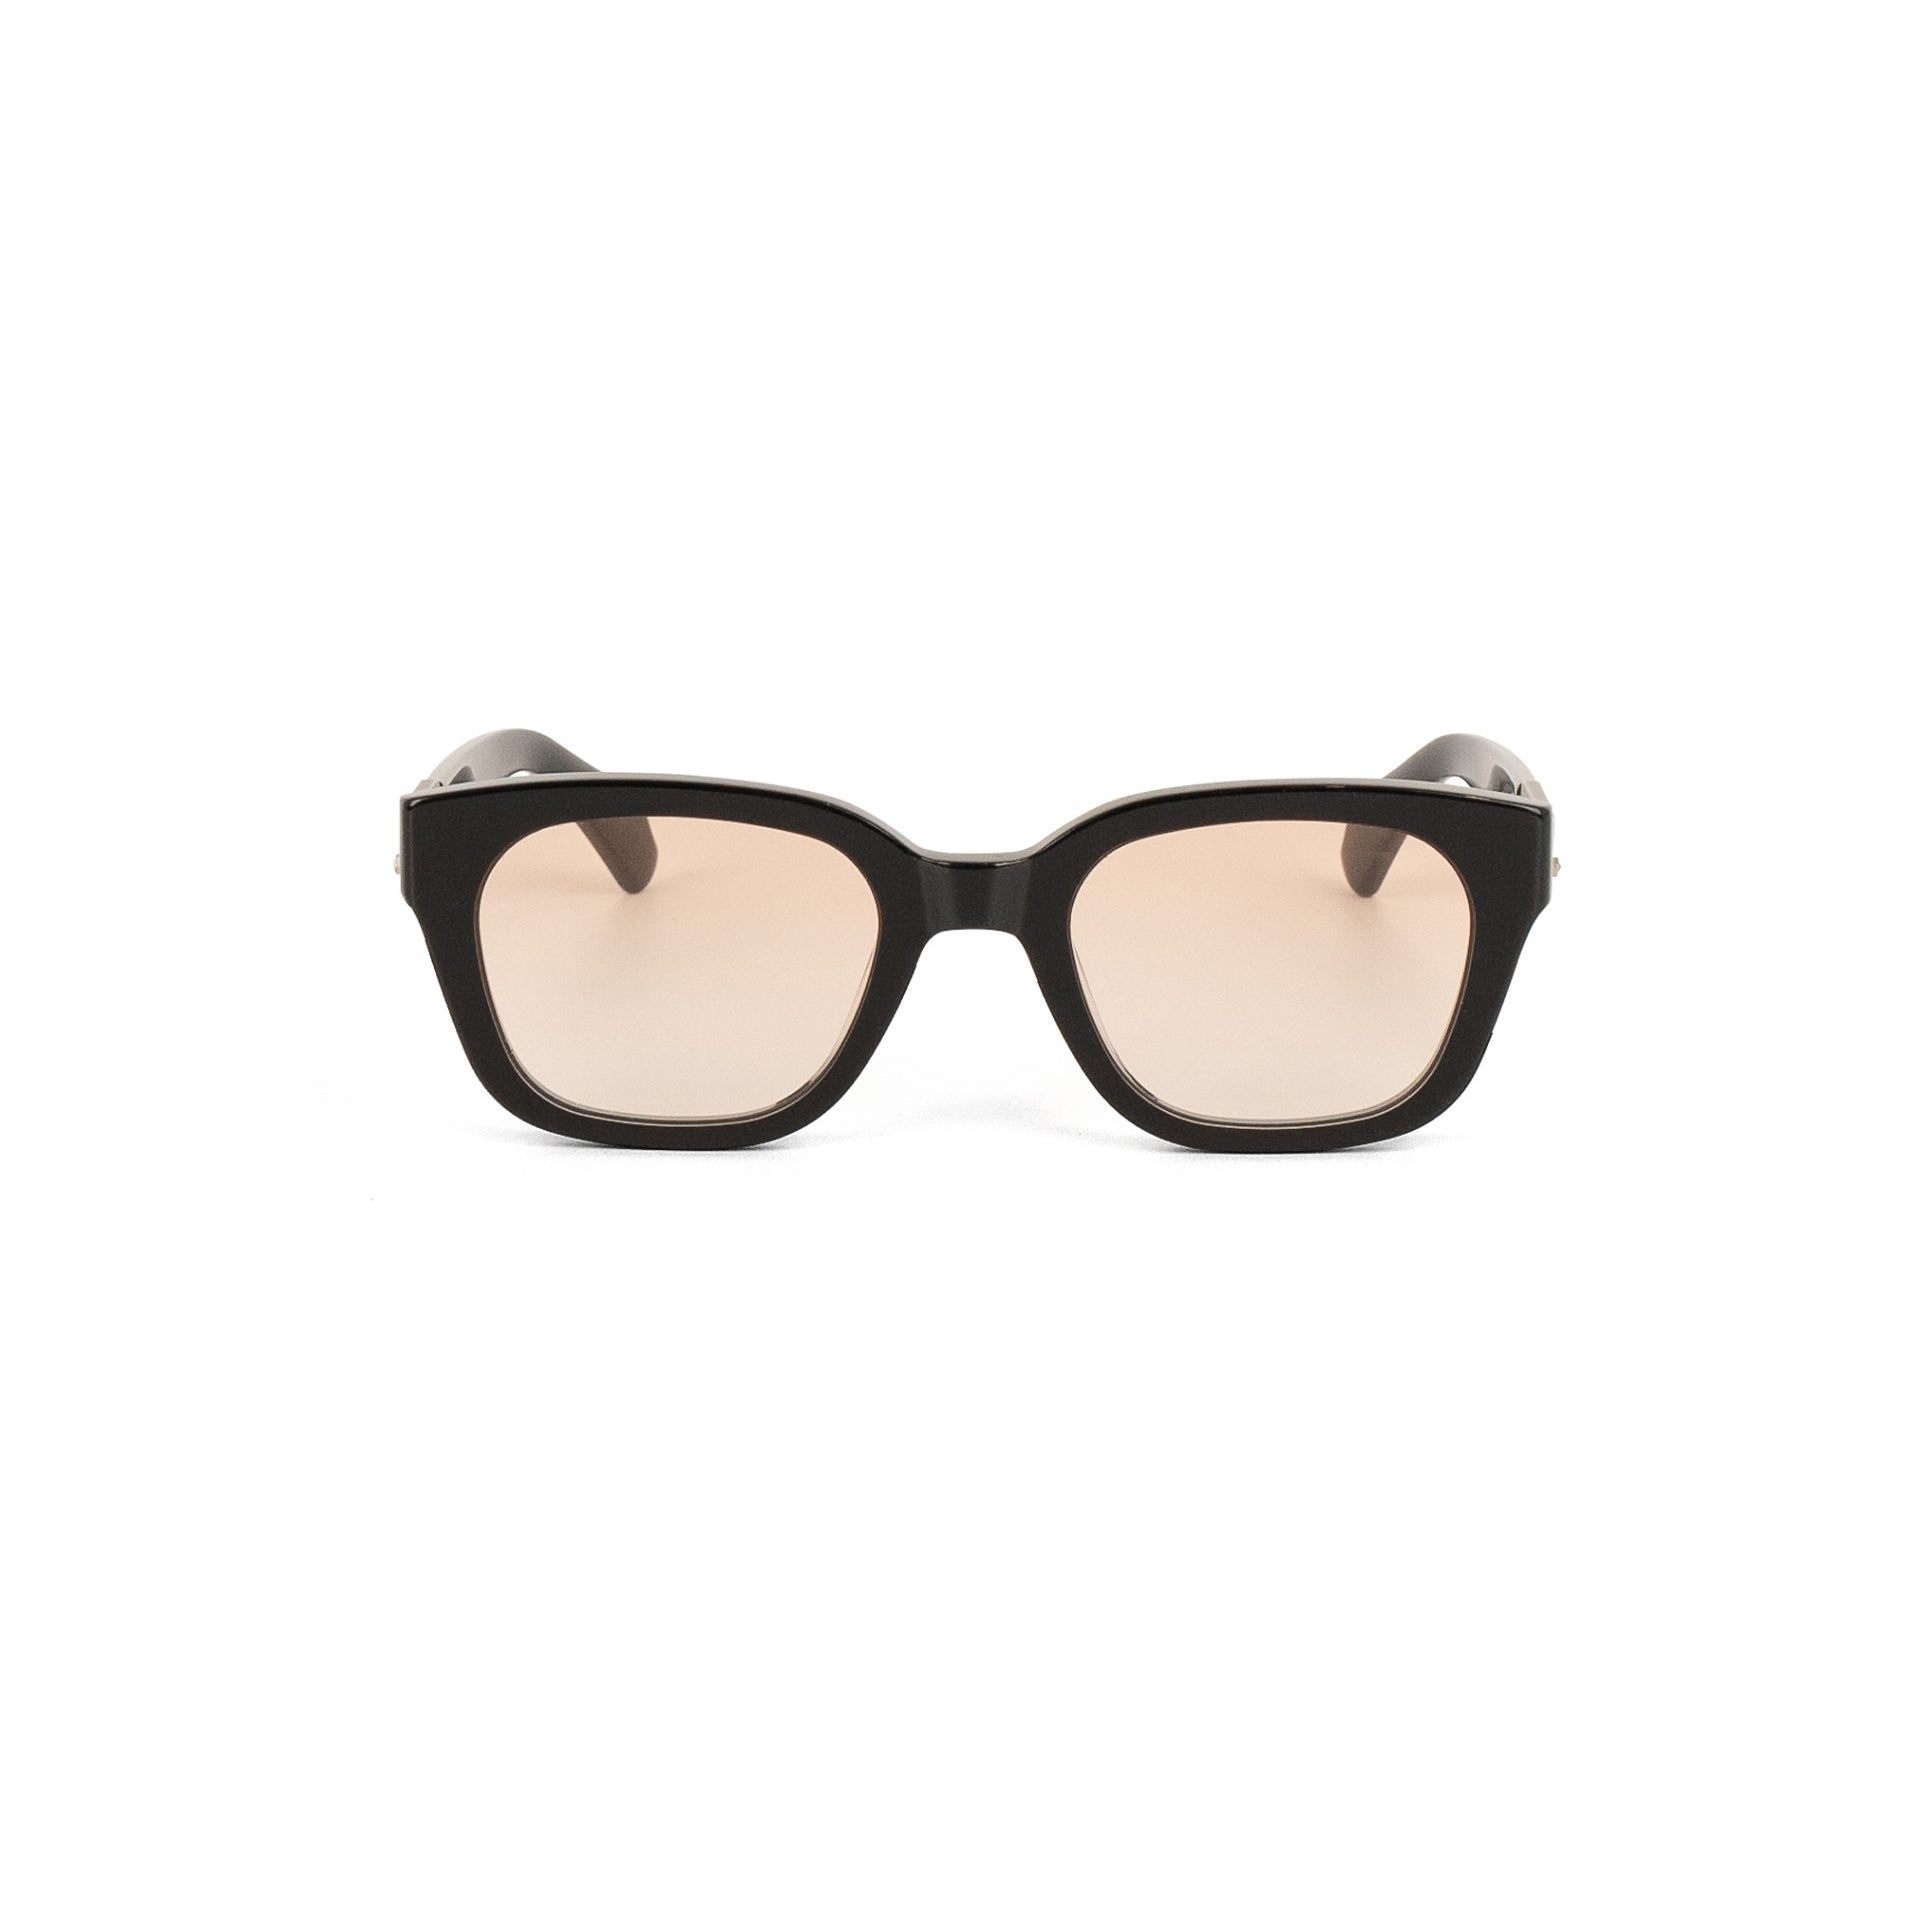 Rubee Sunglasses Collection BROWN